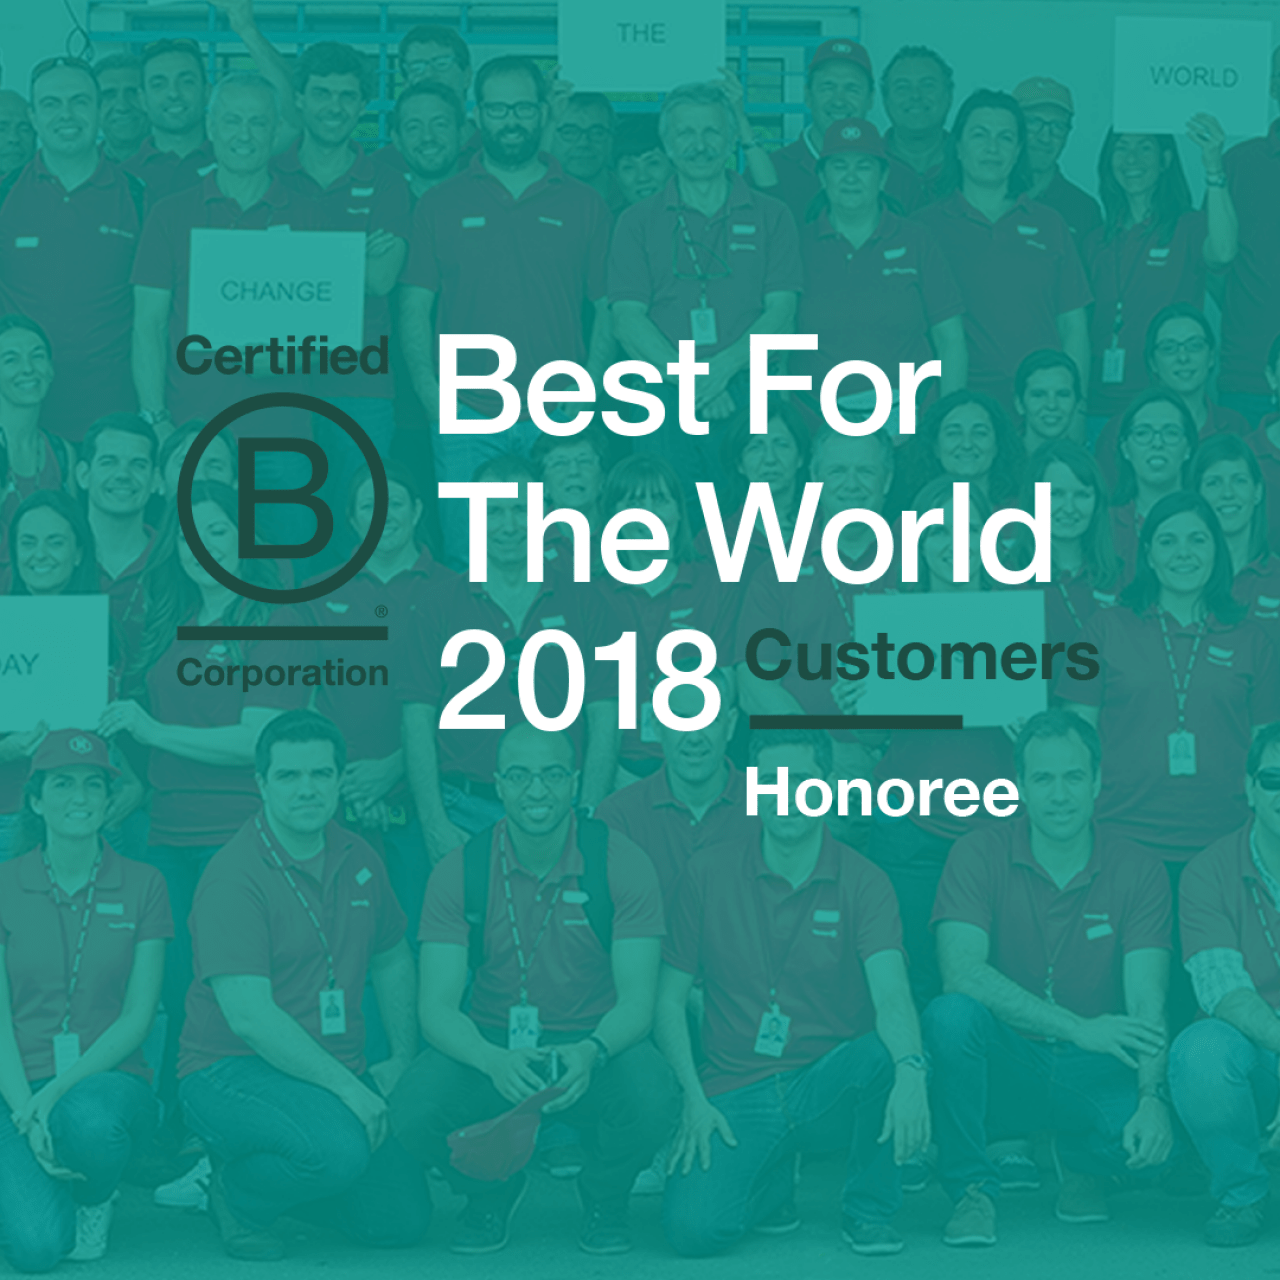 Customers Best For The World List | Hovione